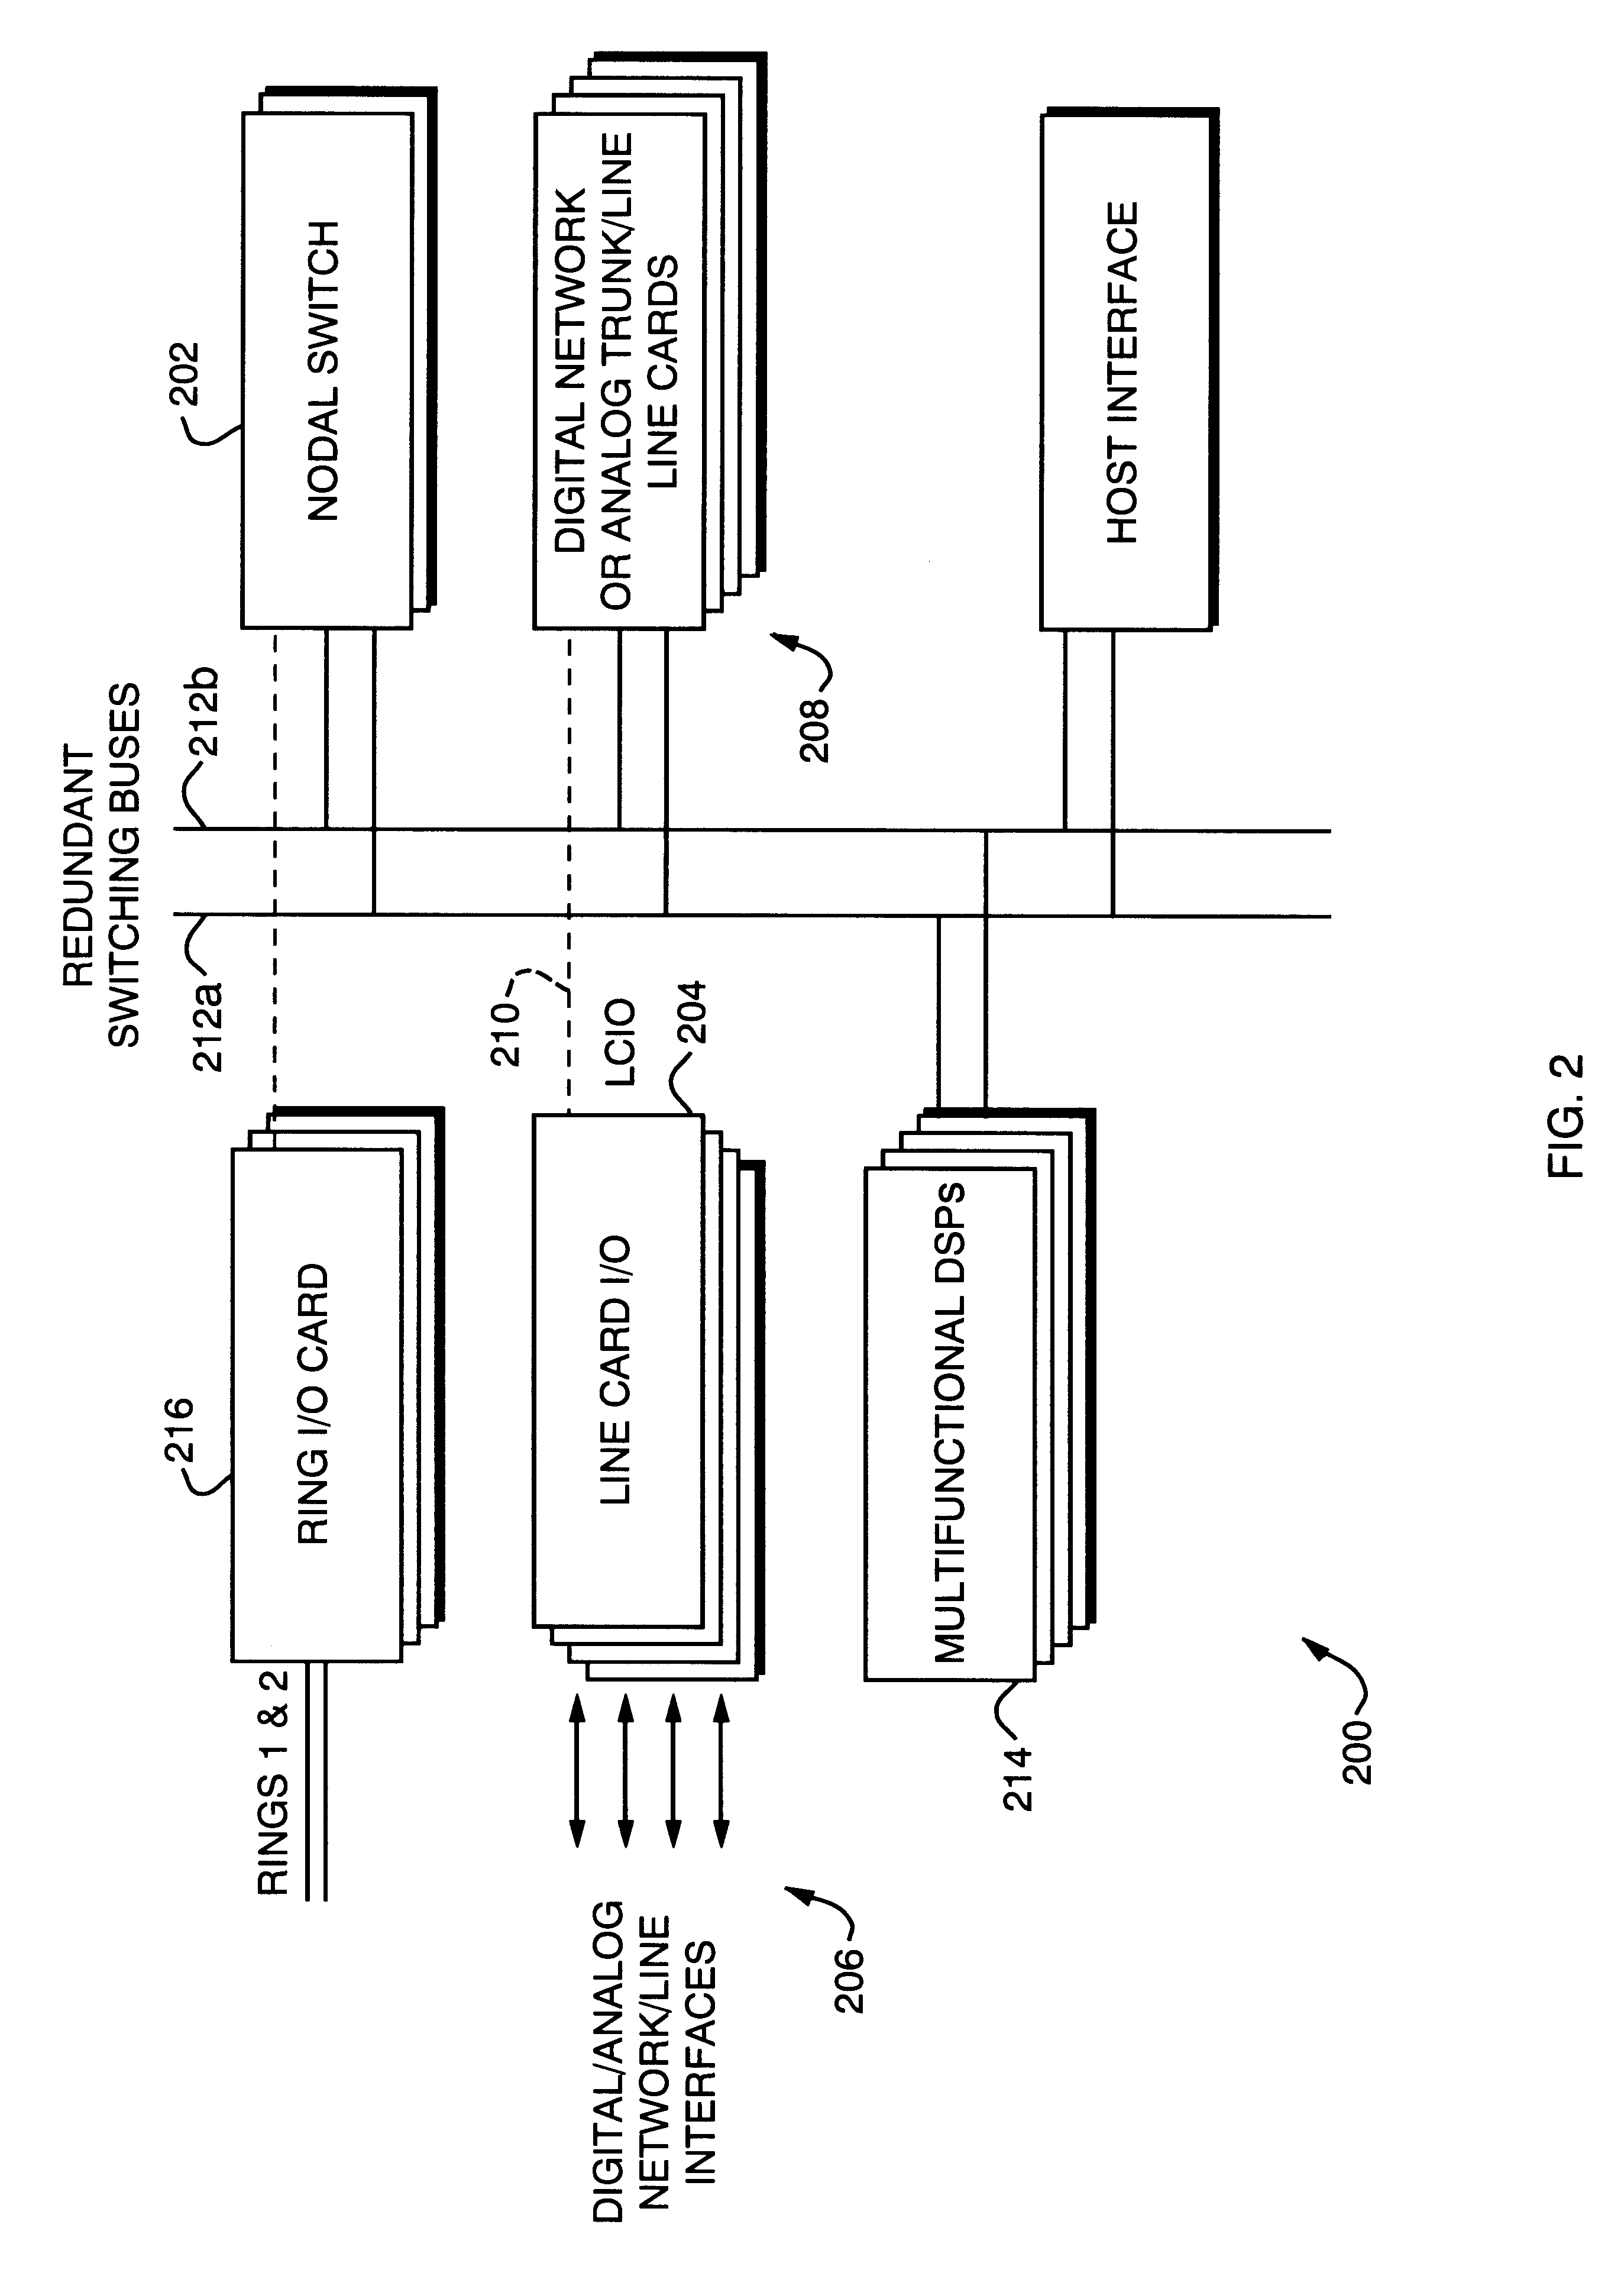 Distributed network synchronization system